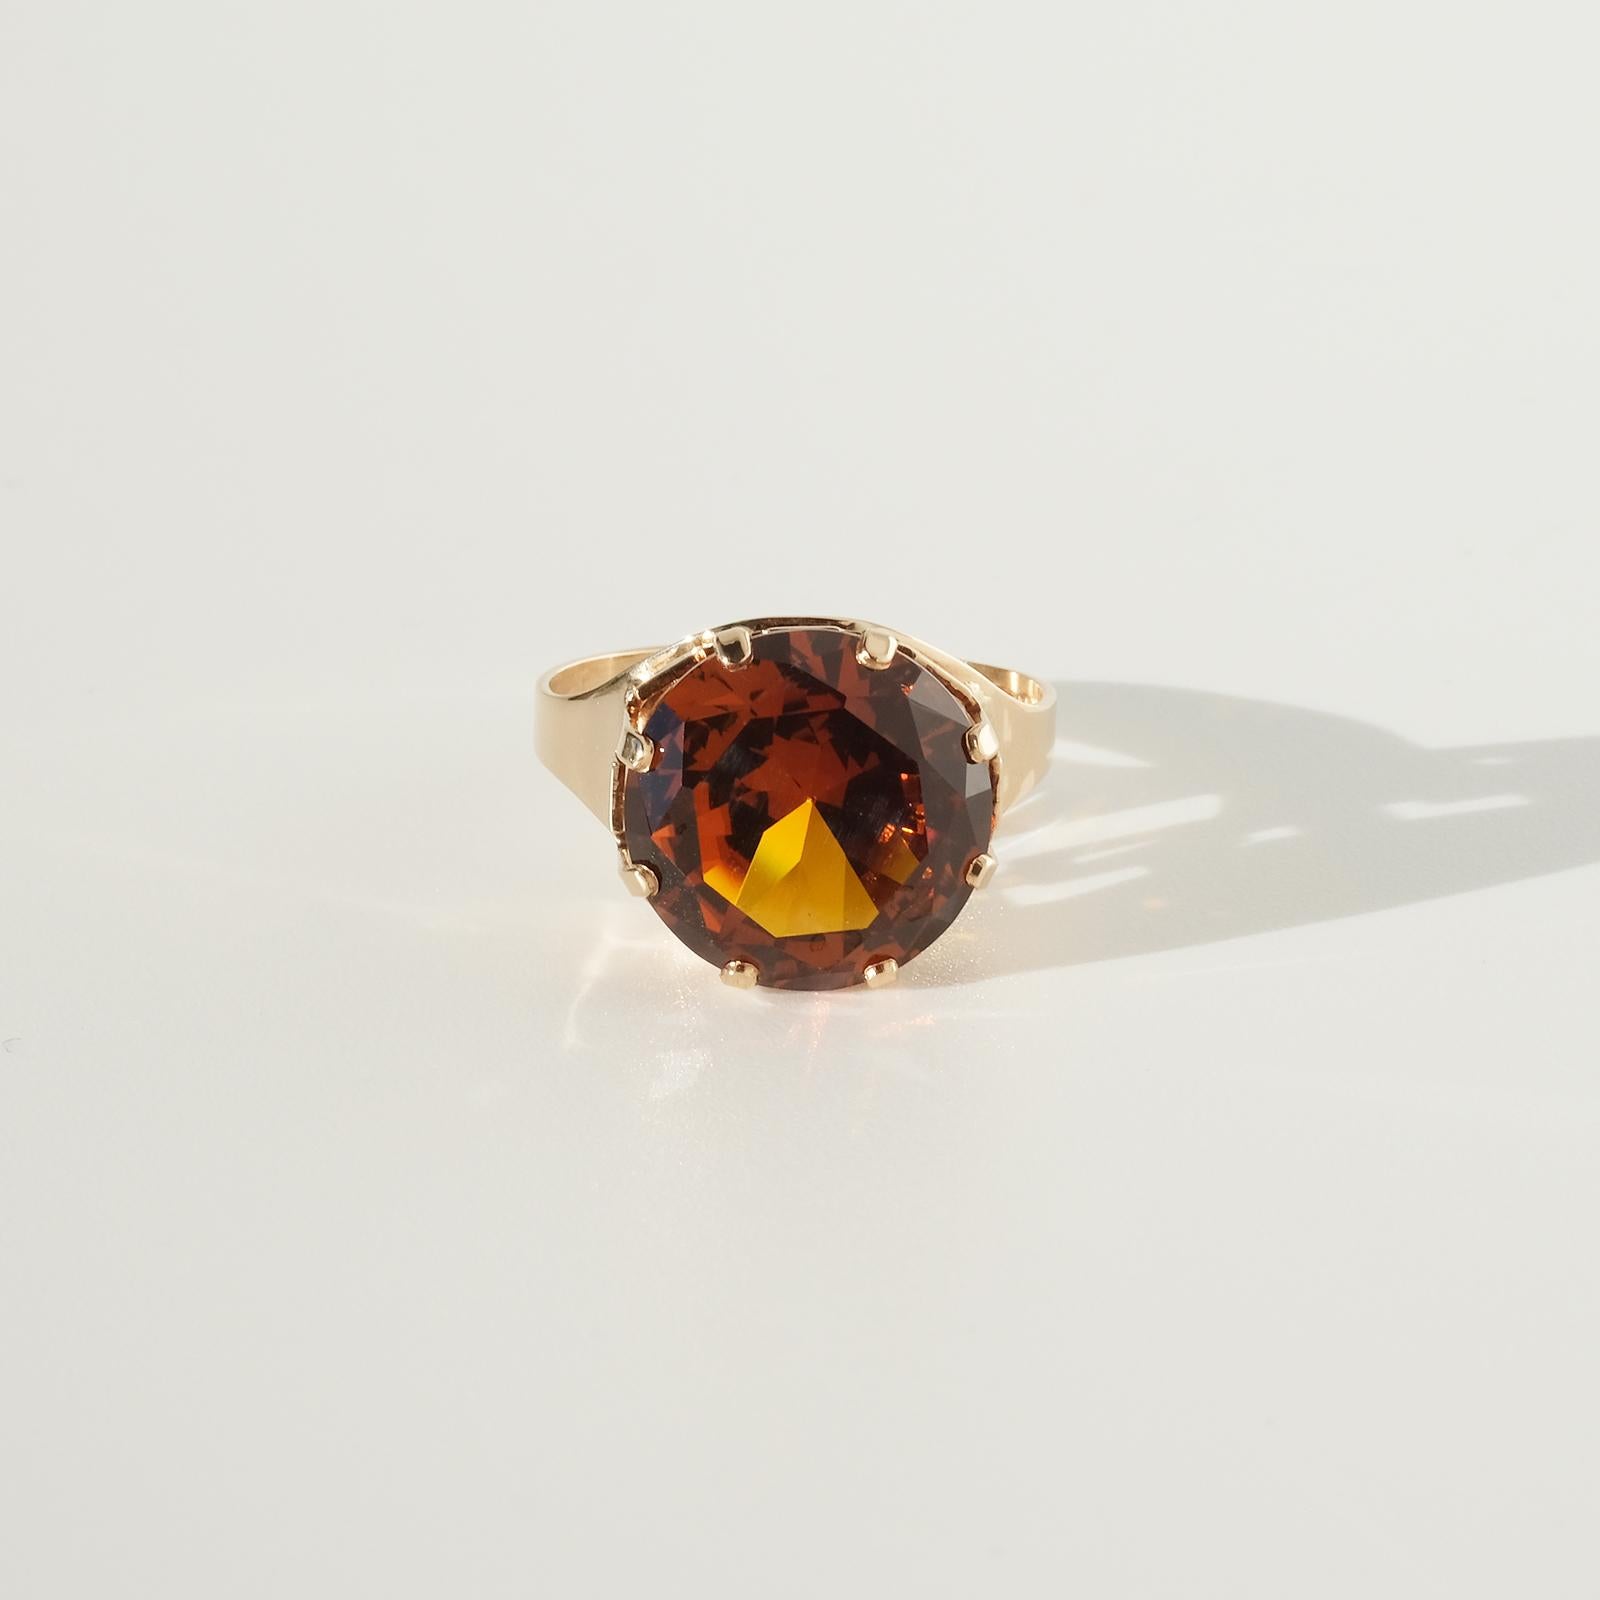 This 14 karat gold cocktail ring has a beautiful orange synthetic sapphire. The sapphire is hold by an amazing setting which resembles a king's crown. 

This ring is a perfect fit for the cocktail party, but it would of course also fit well in an